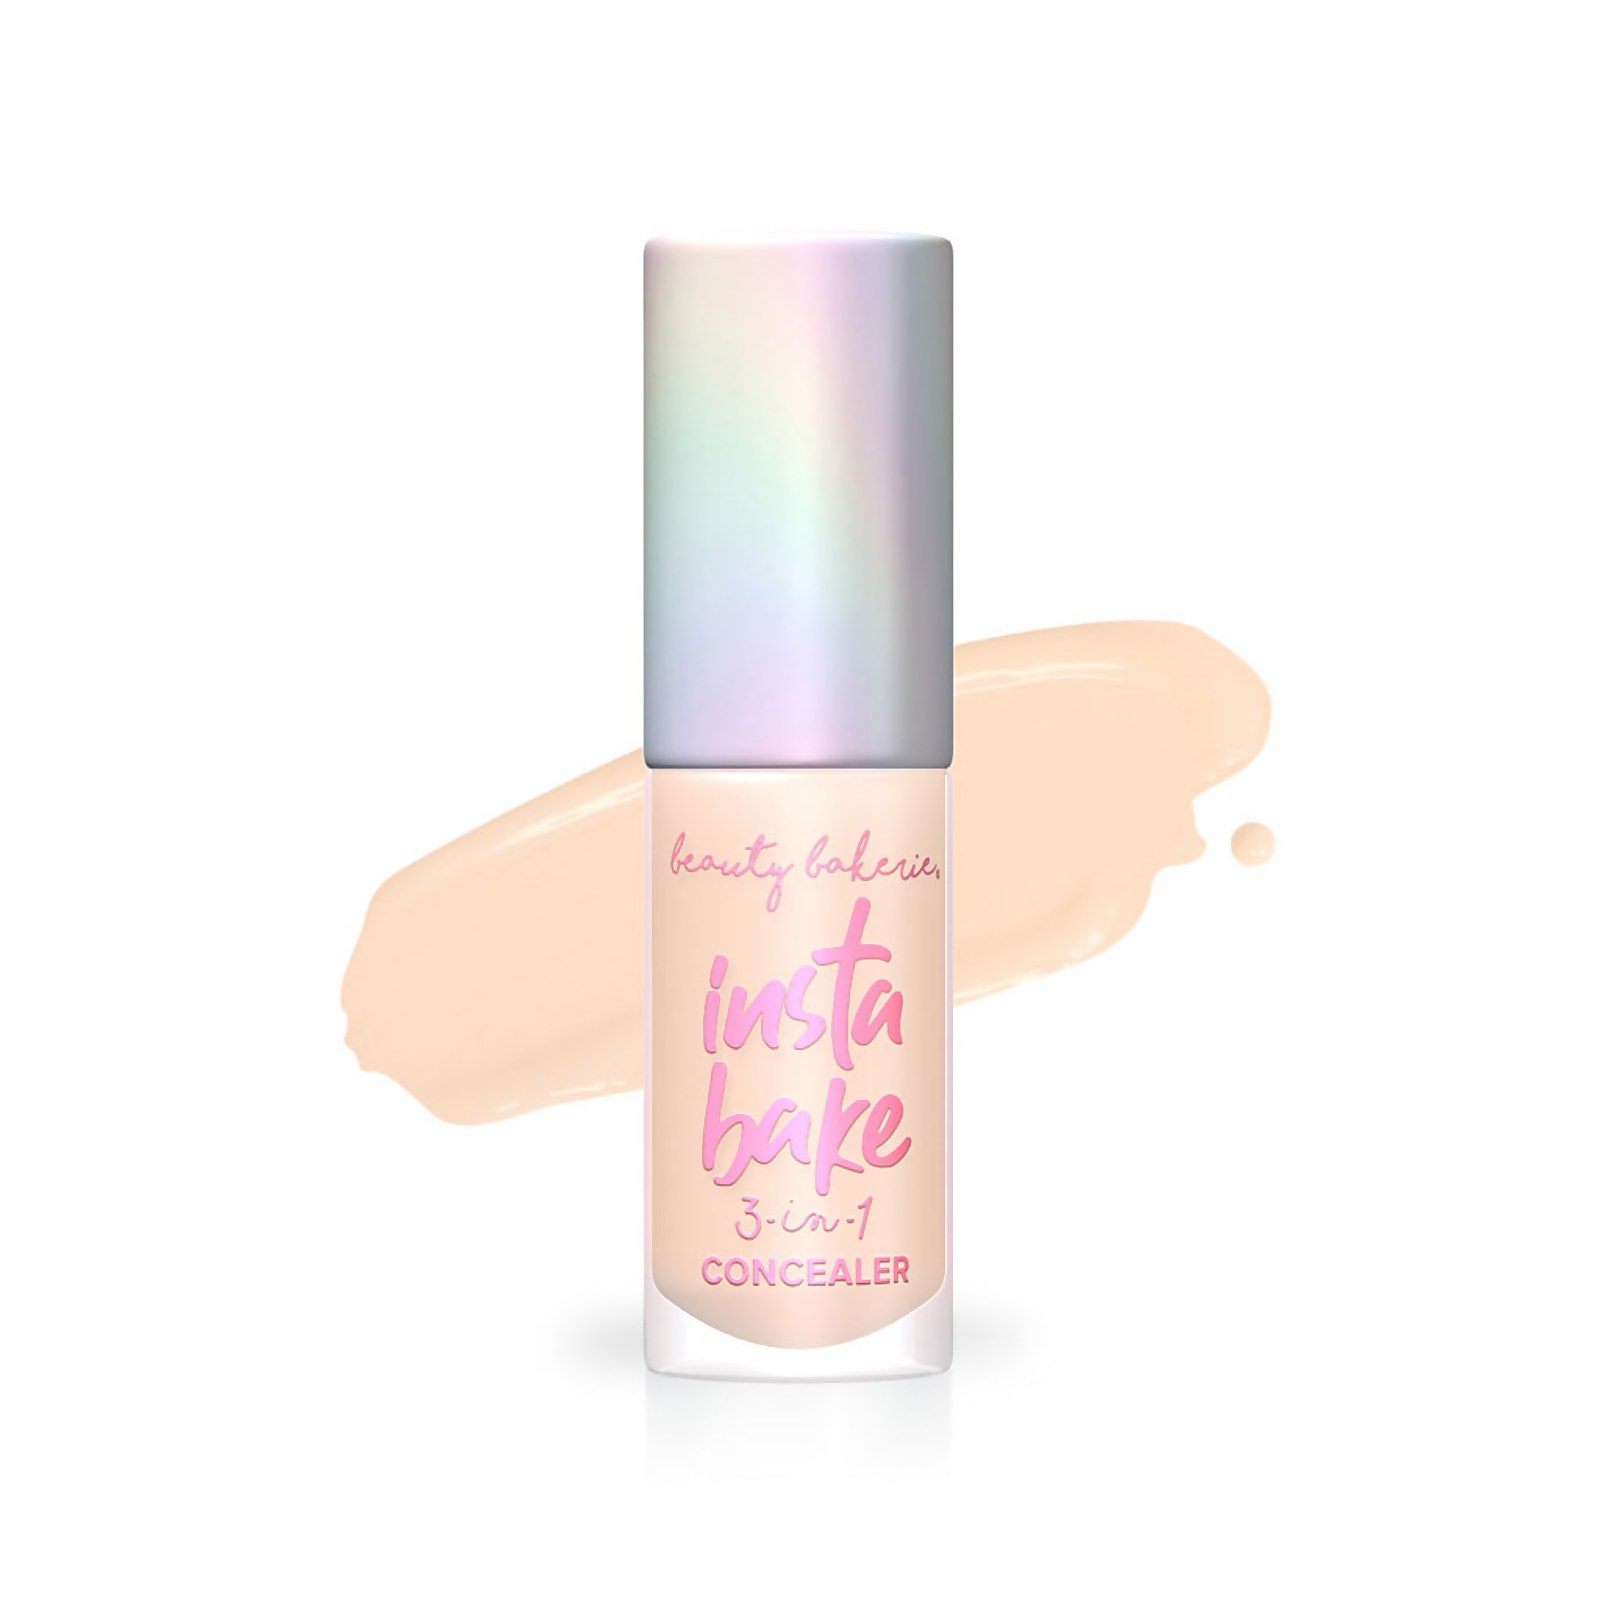 Beauty Bakerie InstaBake 3-in-1 Hydrating Concealer (Various Shades) - 018 Nice Cream